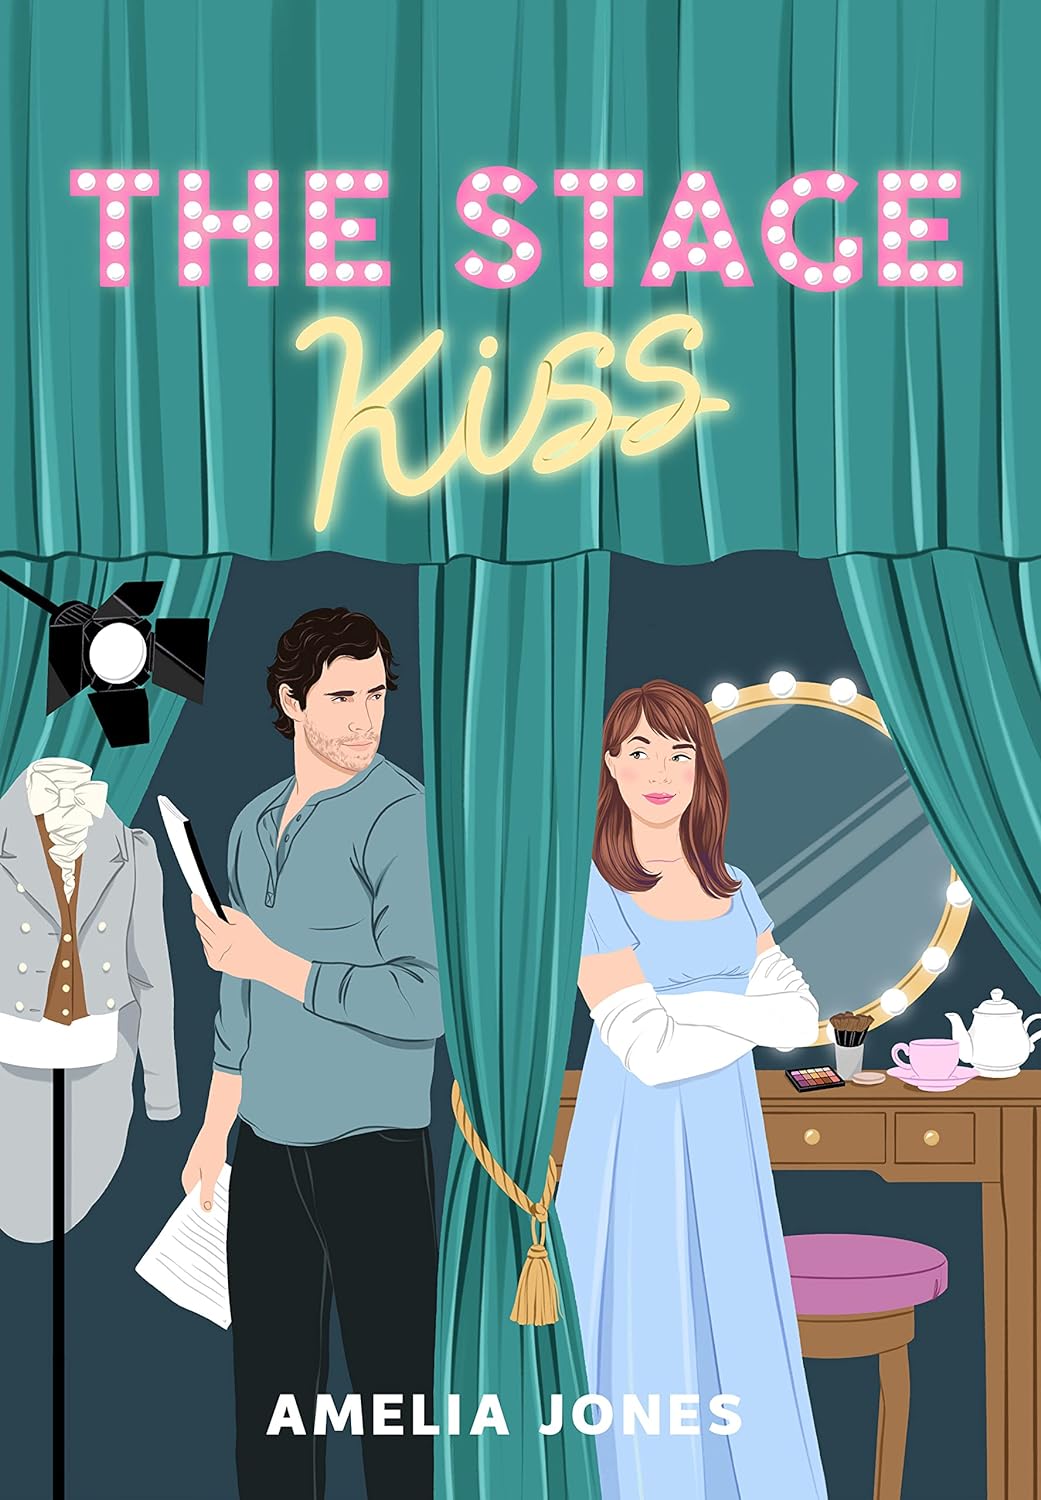 Image for "The Stage Kiss"